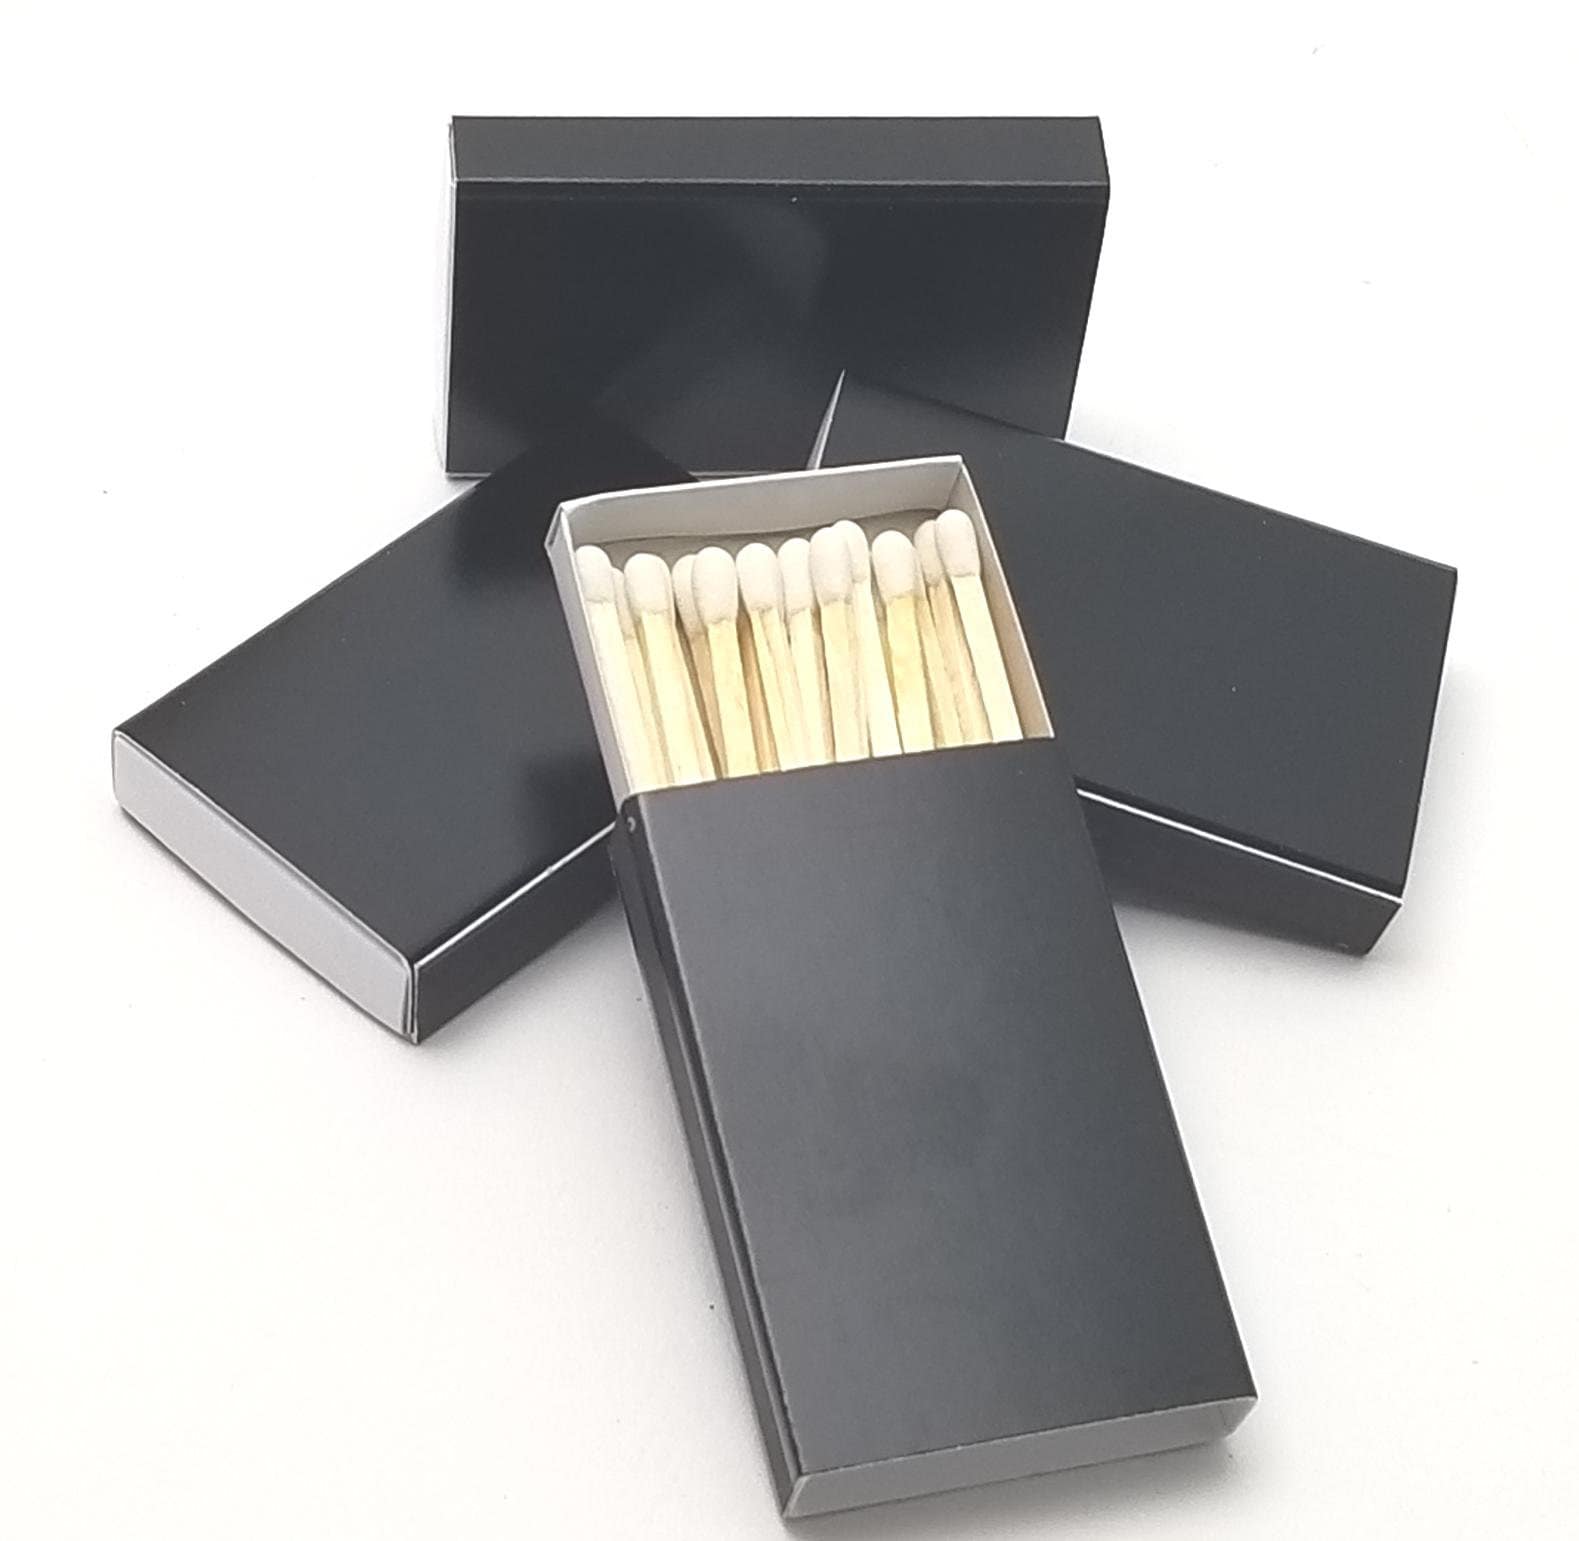 50 Plain Black Cover Jacket Wooden Matches in Cardboard Box Matches NO  INTERNATIONAL SALES 